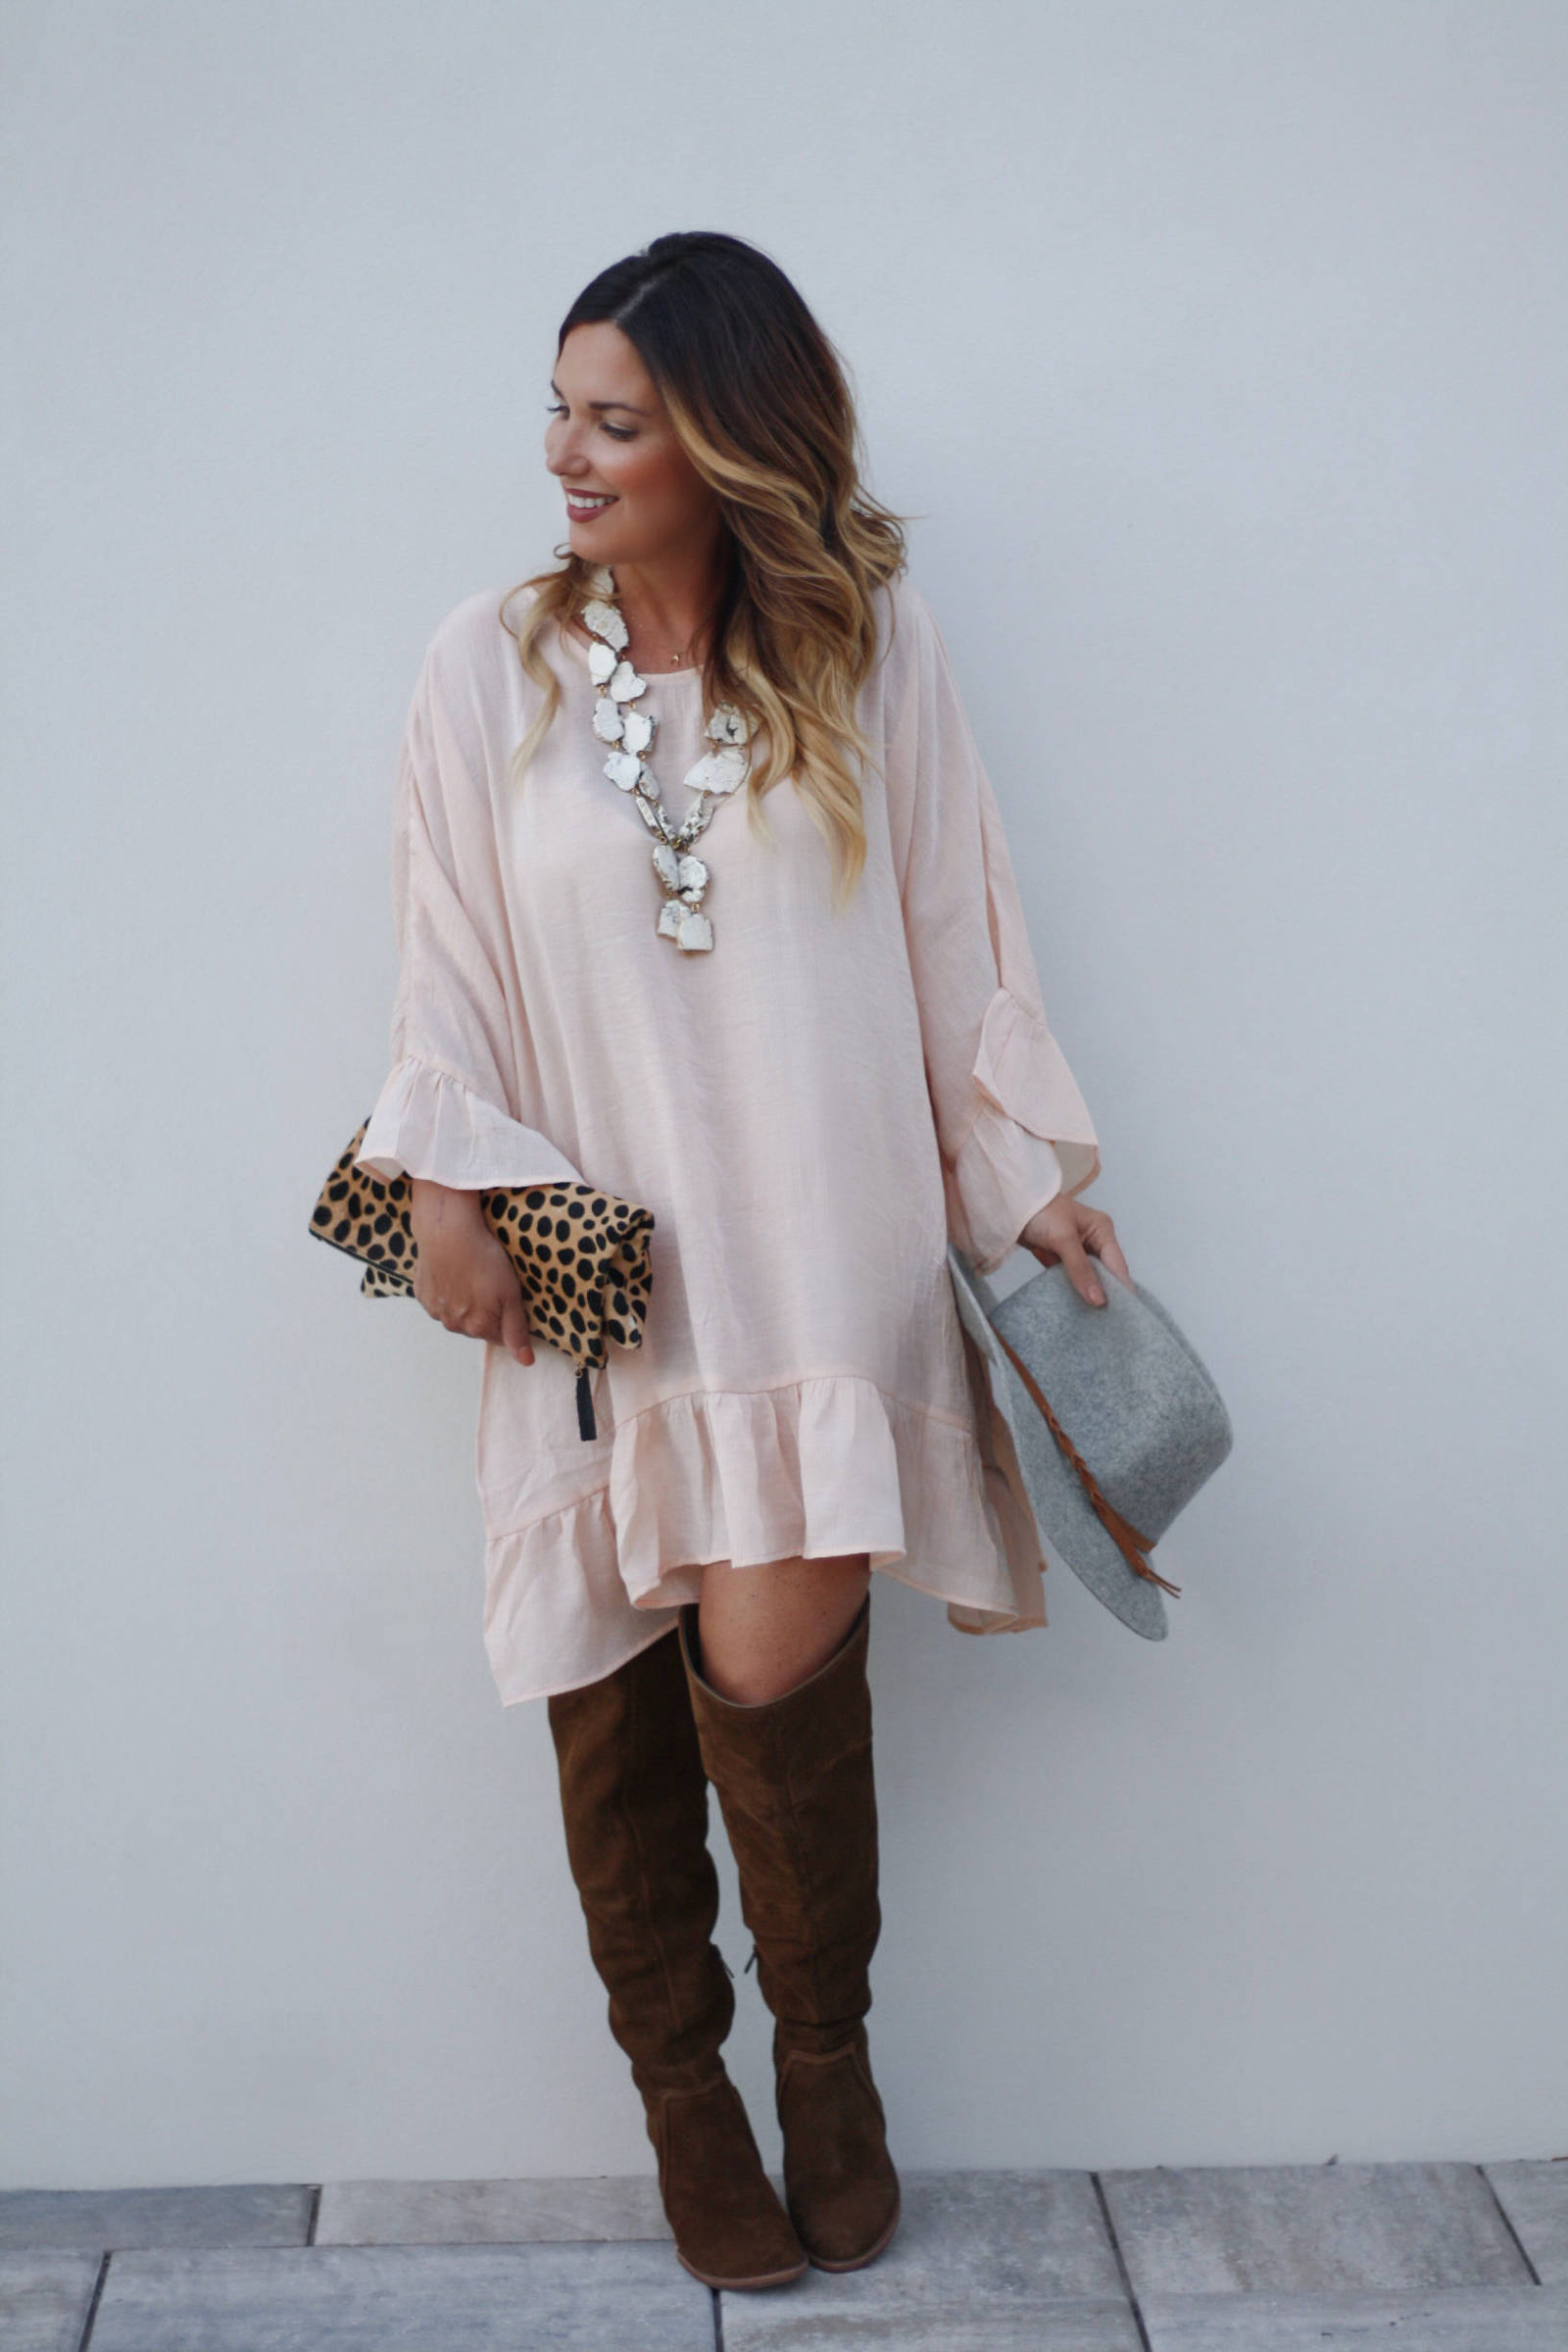 Ruffles and over the knee boots - Dashing Darlin'